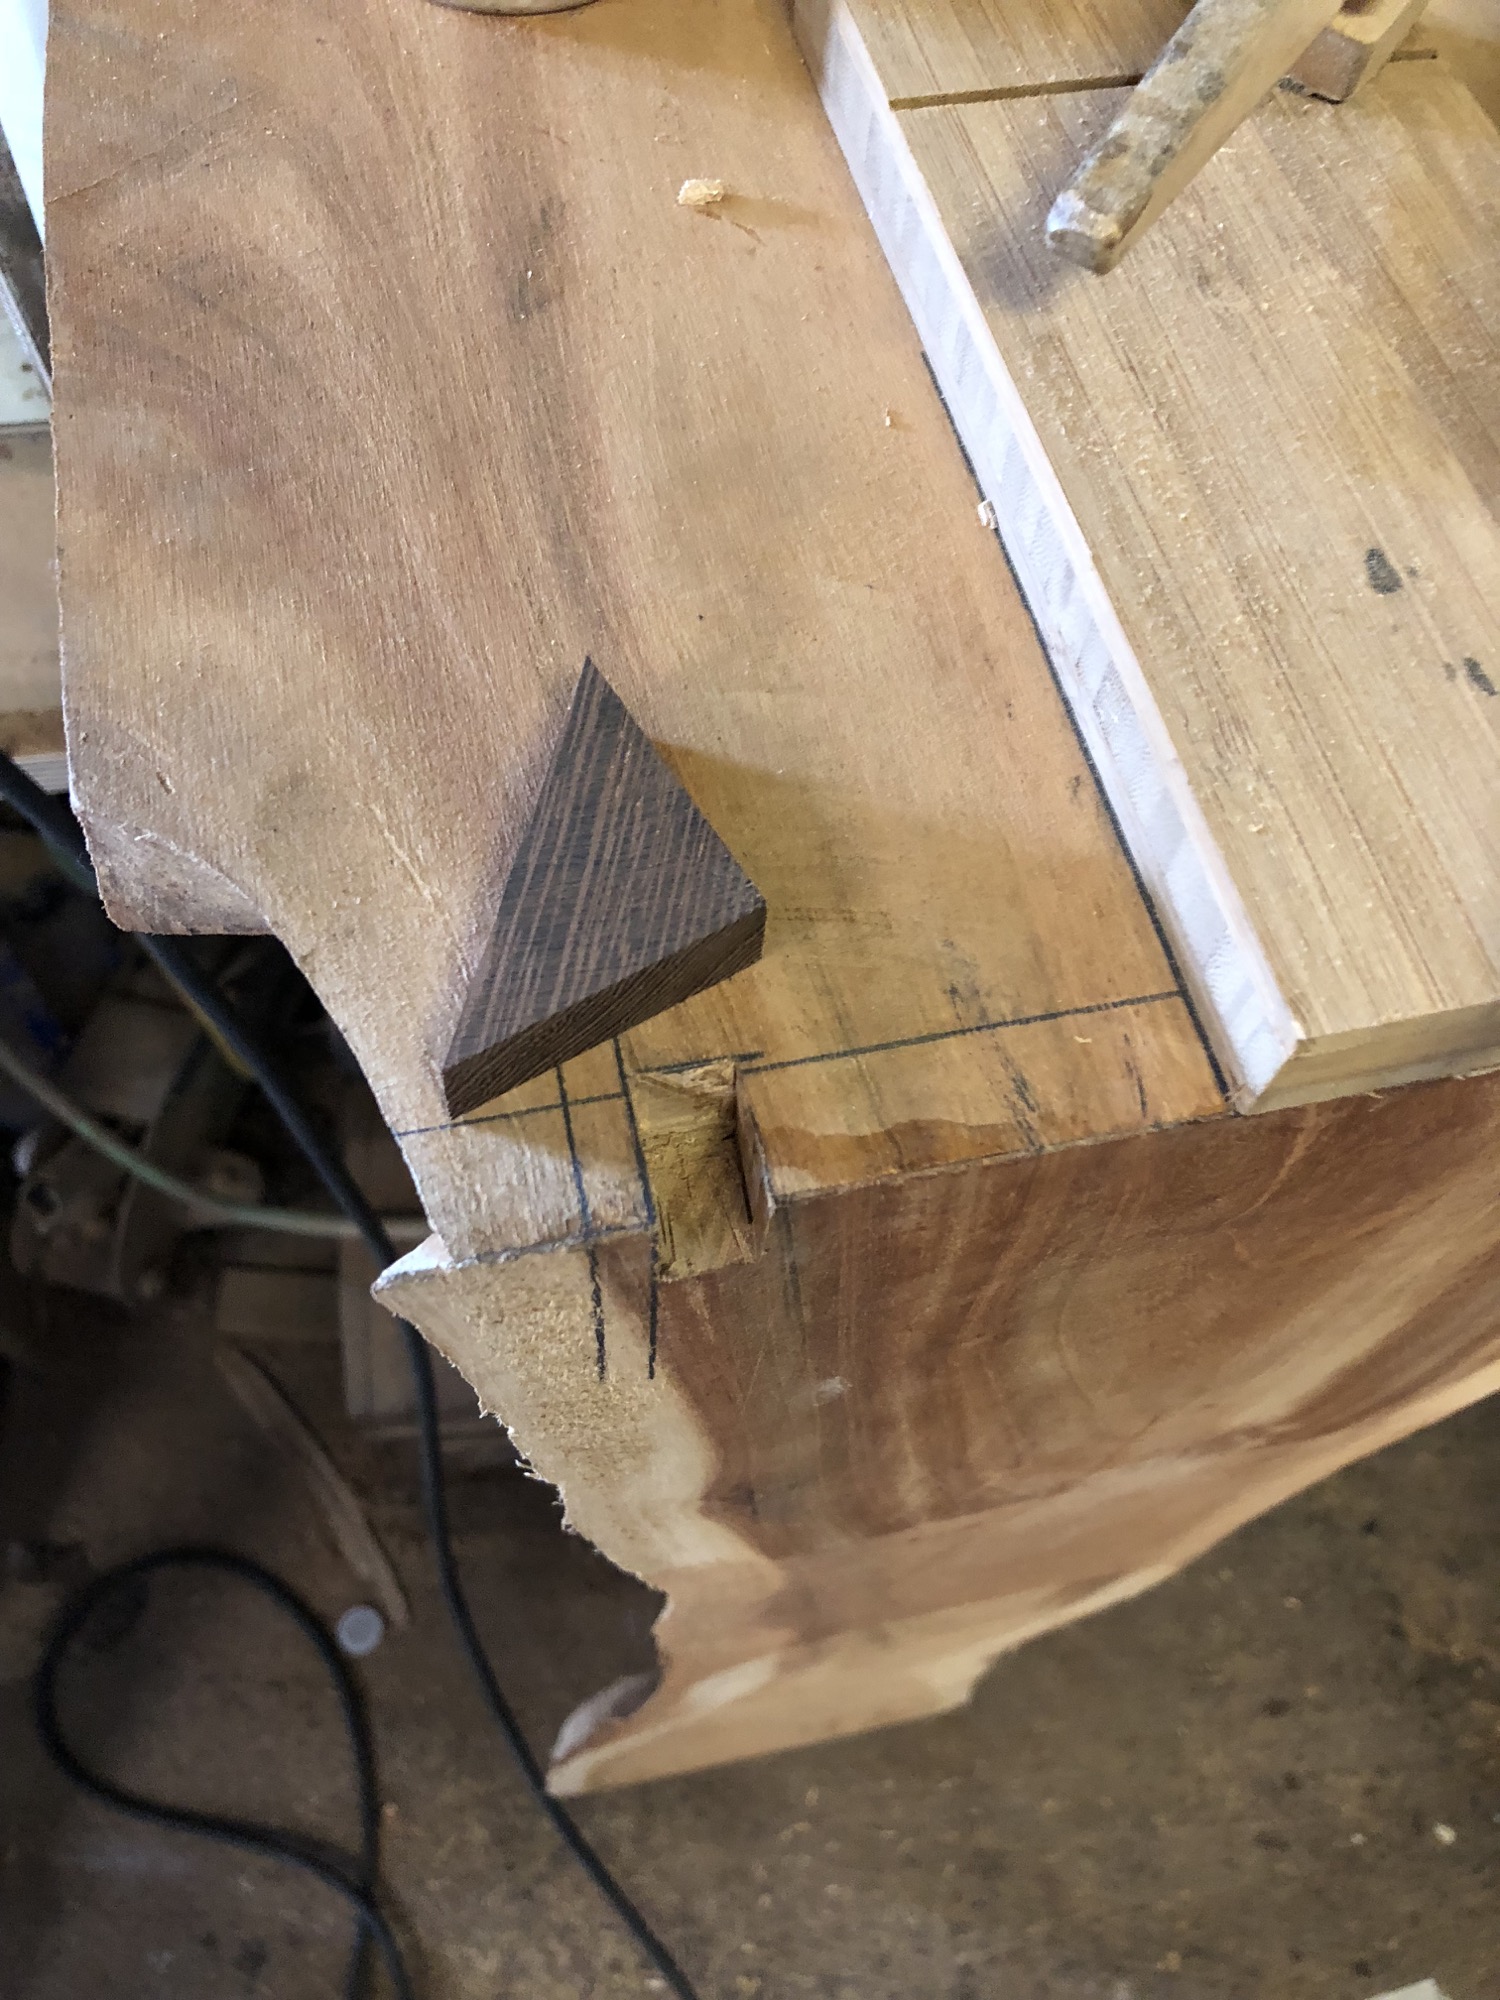  Wood glue is generally extremely strong. If you glue the sides of two boards together, that glue joint will be stronger than the wood itself. The sides of a board I'll call "long grain," because the wood's fibers are running the length of the board.